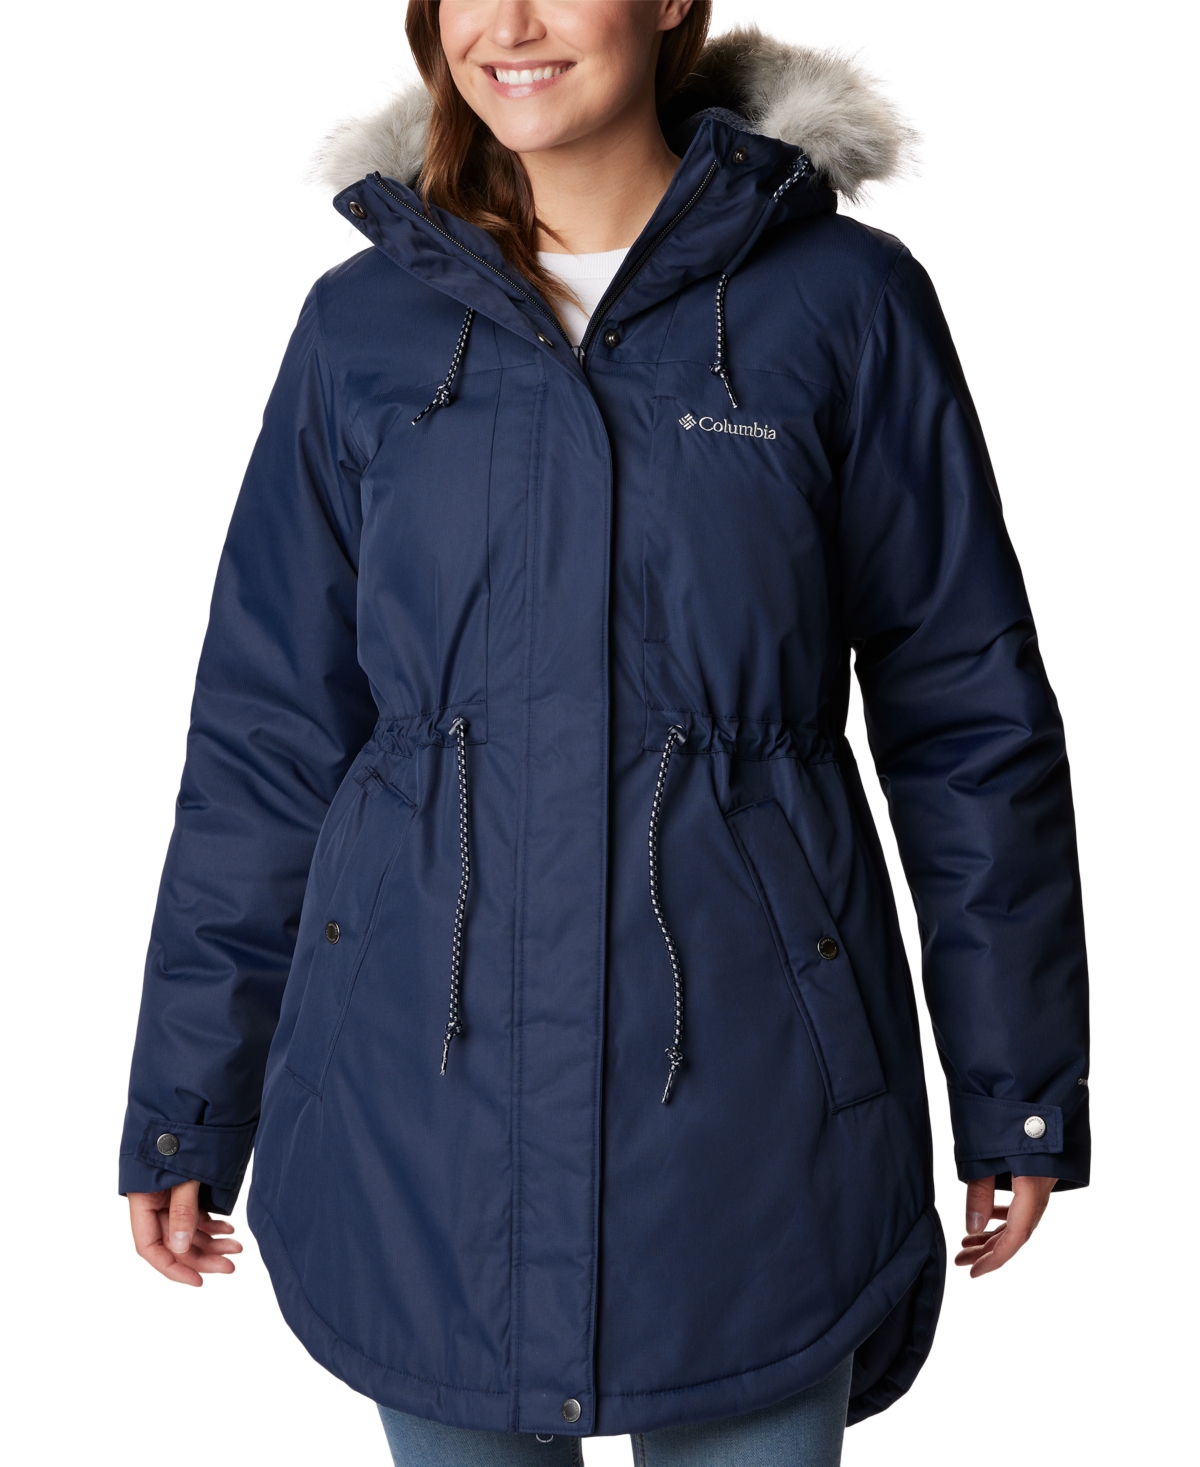 Columbia Women's Suttle Mountain Mid Jacket - Red Lily